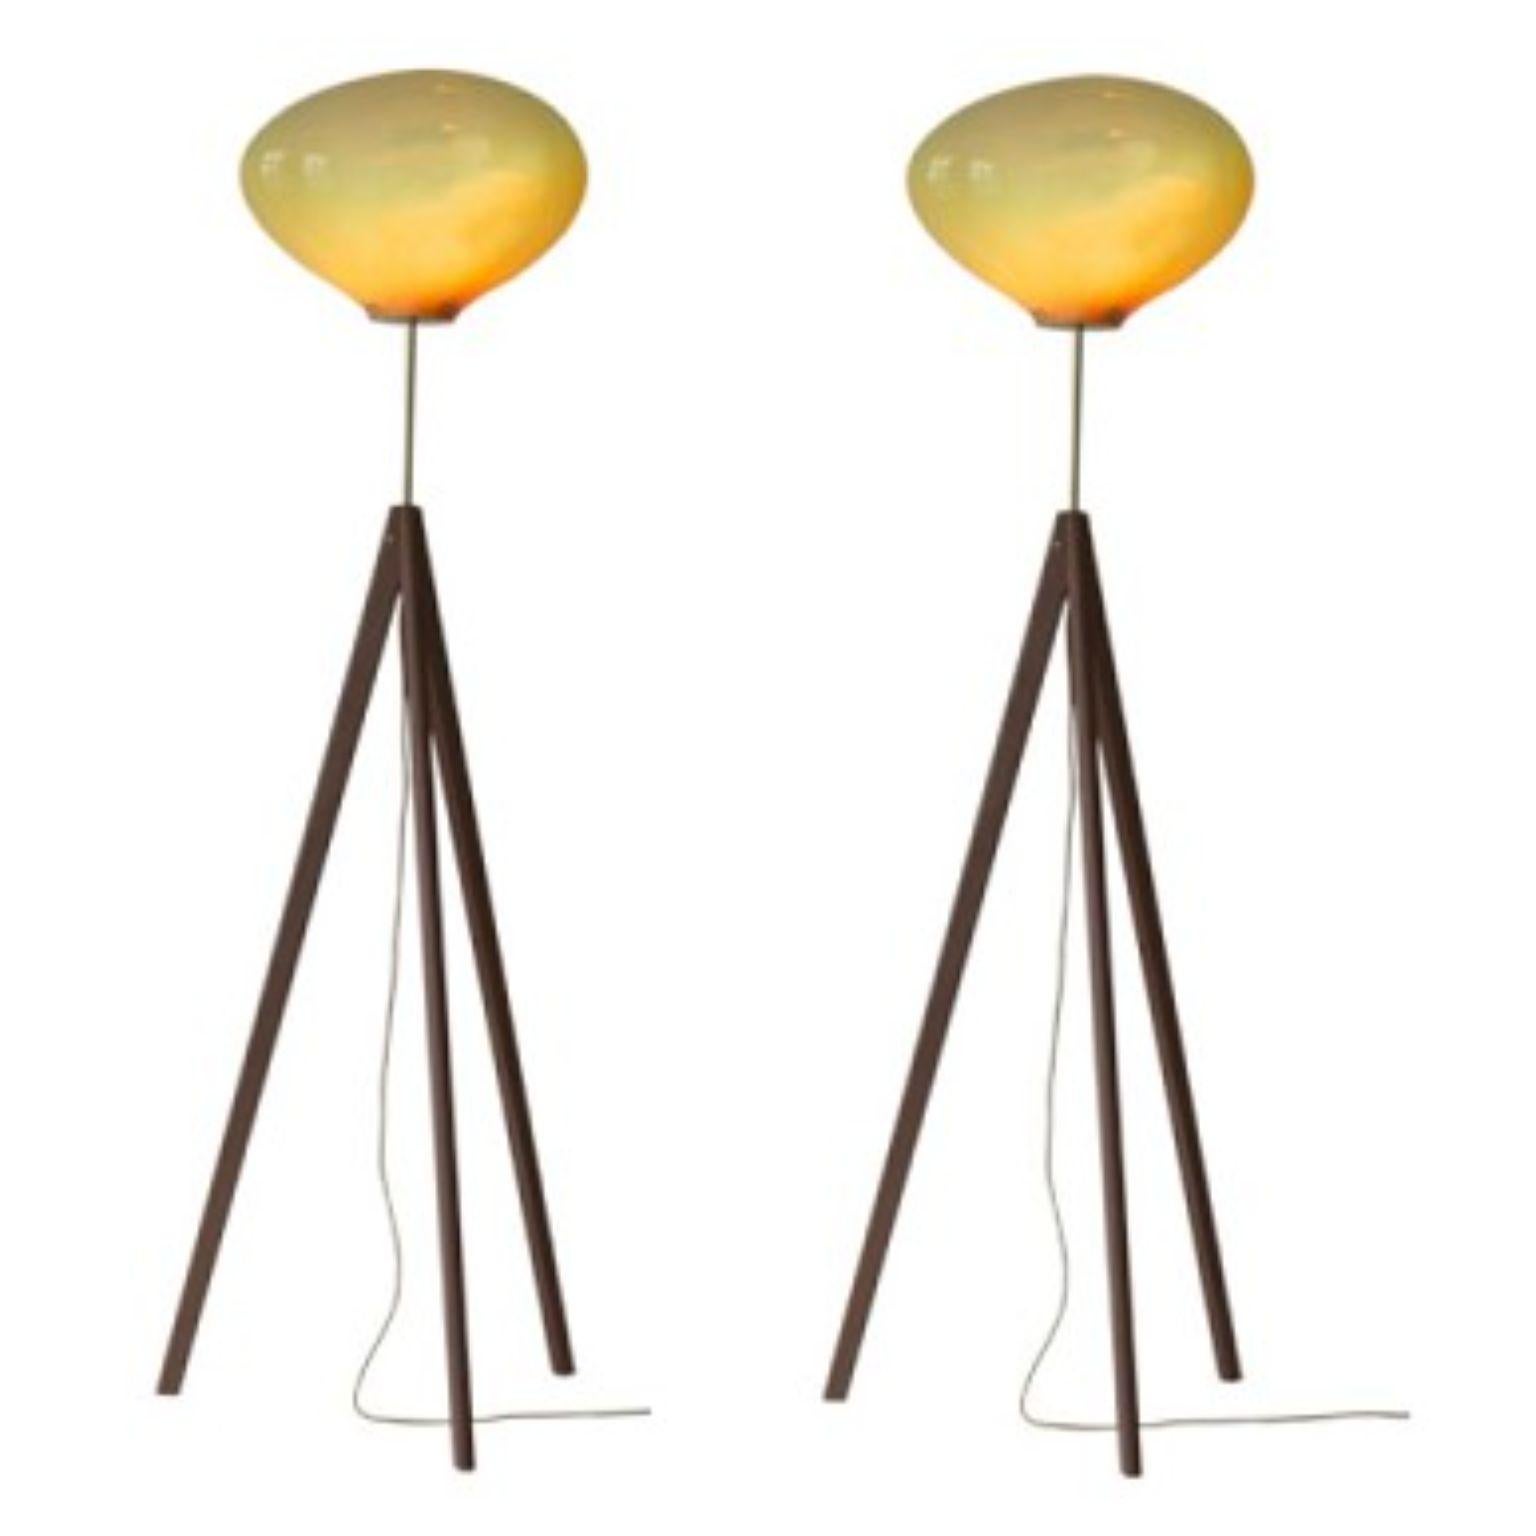 Set of 2 stati x amber iridescent floor lamps by Eloa.
No UL listed 
Material: glass, steel, silver, led bulb, brass, walnut, oak
Dimensions: D62 x W62 x H180 cm
Also available in different colours and dimensions.

All our lamps can be wired